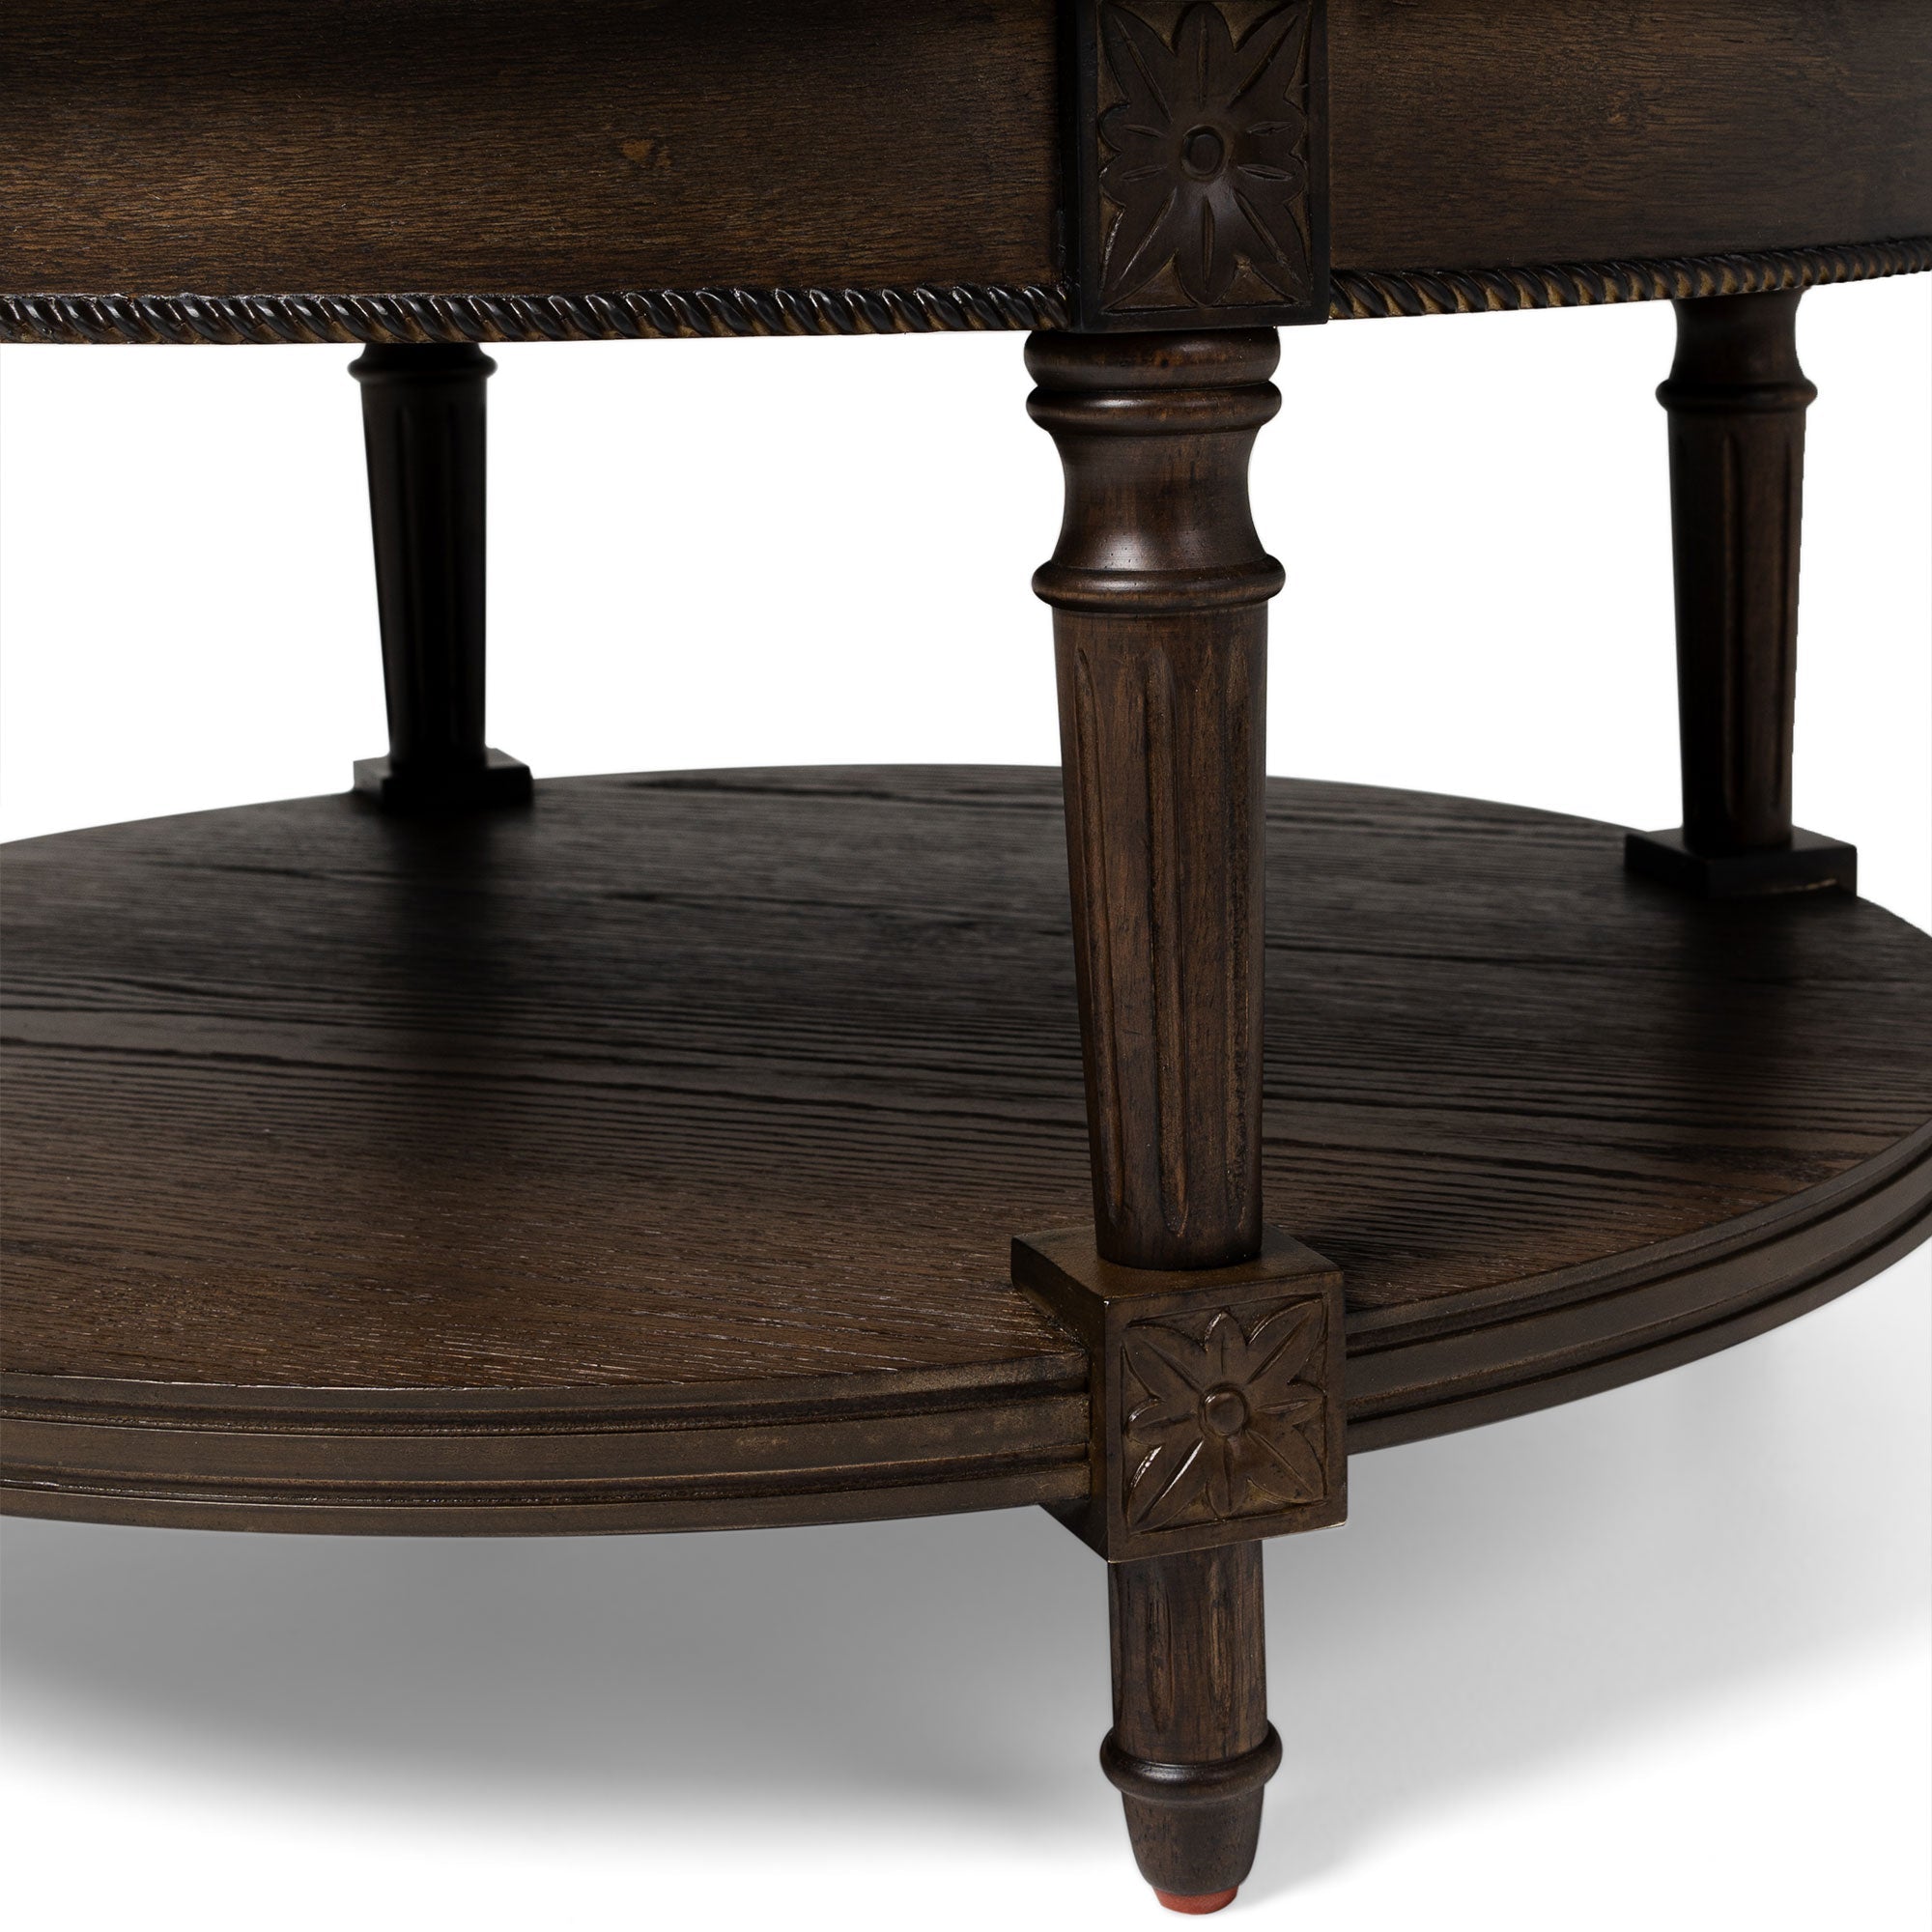 Pullman Traditional Round Wooden Coffee Table in Antiqued Brown Finish in Accent Tables by Maven Lane